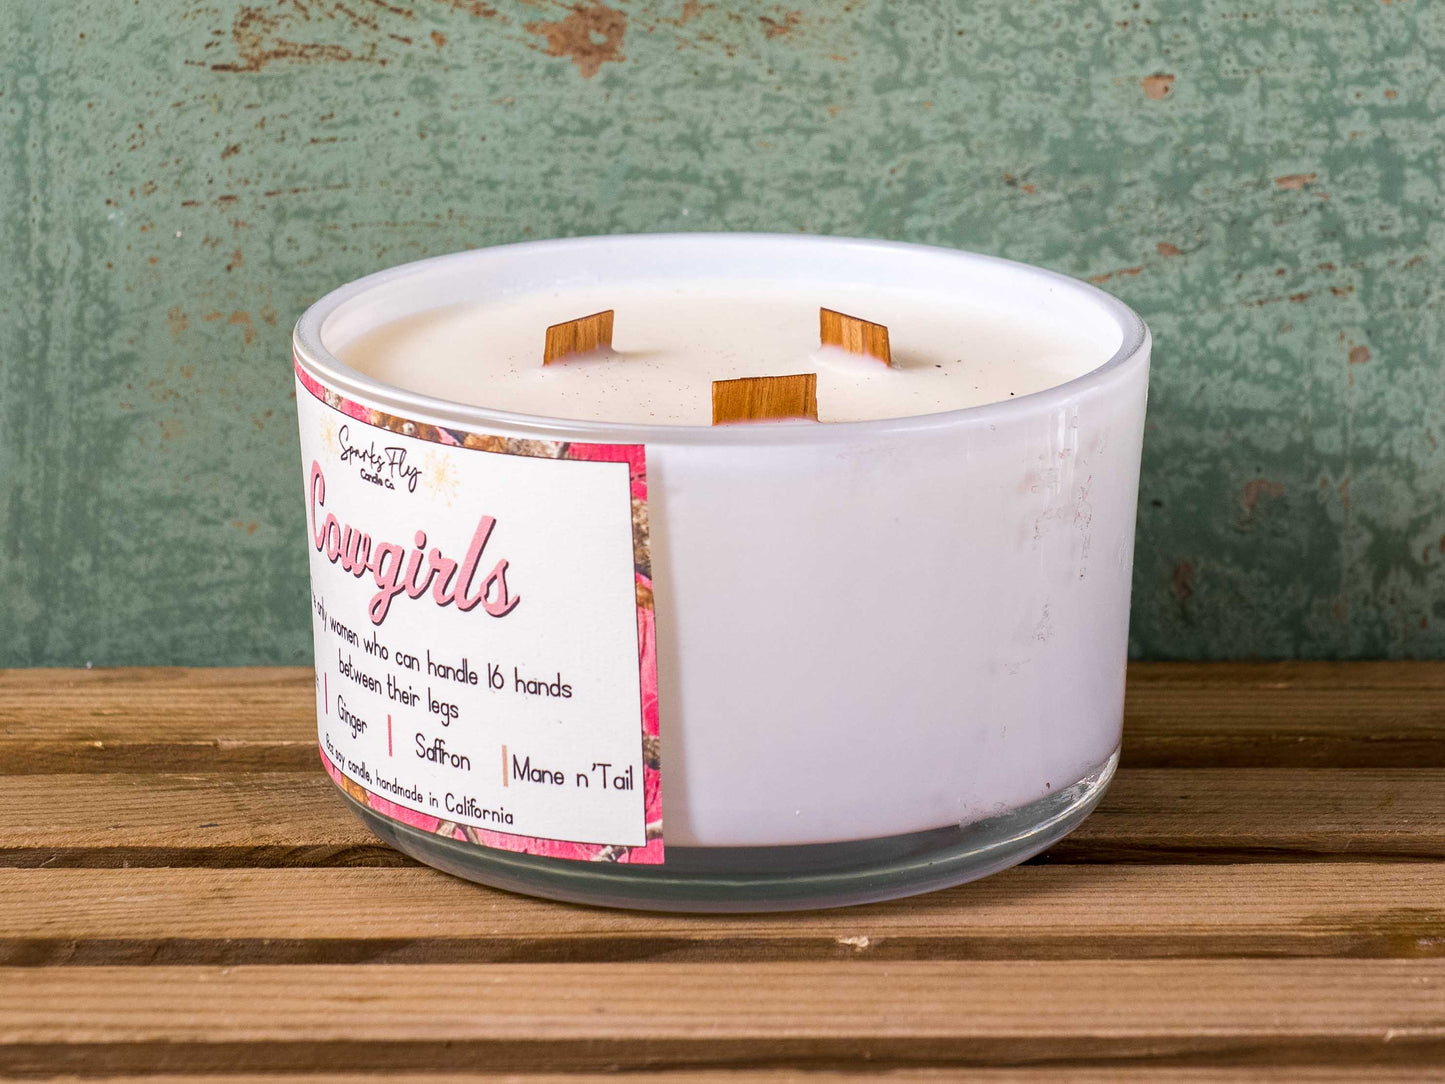 Cowgirls: The only women who can handle 16 hands between their legs!   Soy Candle